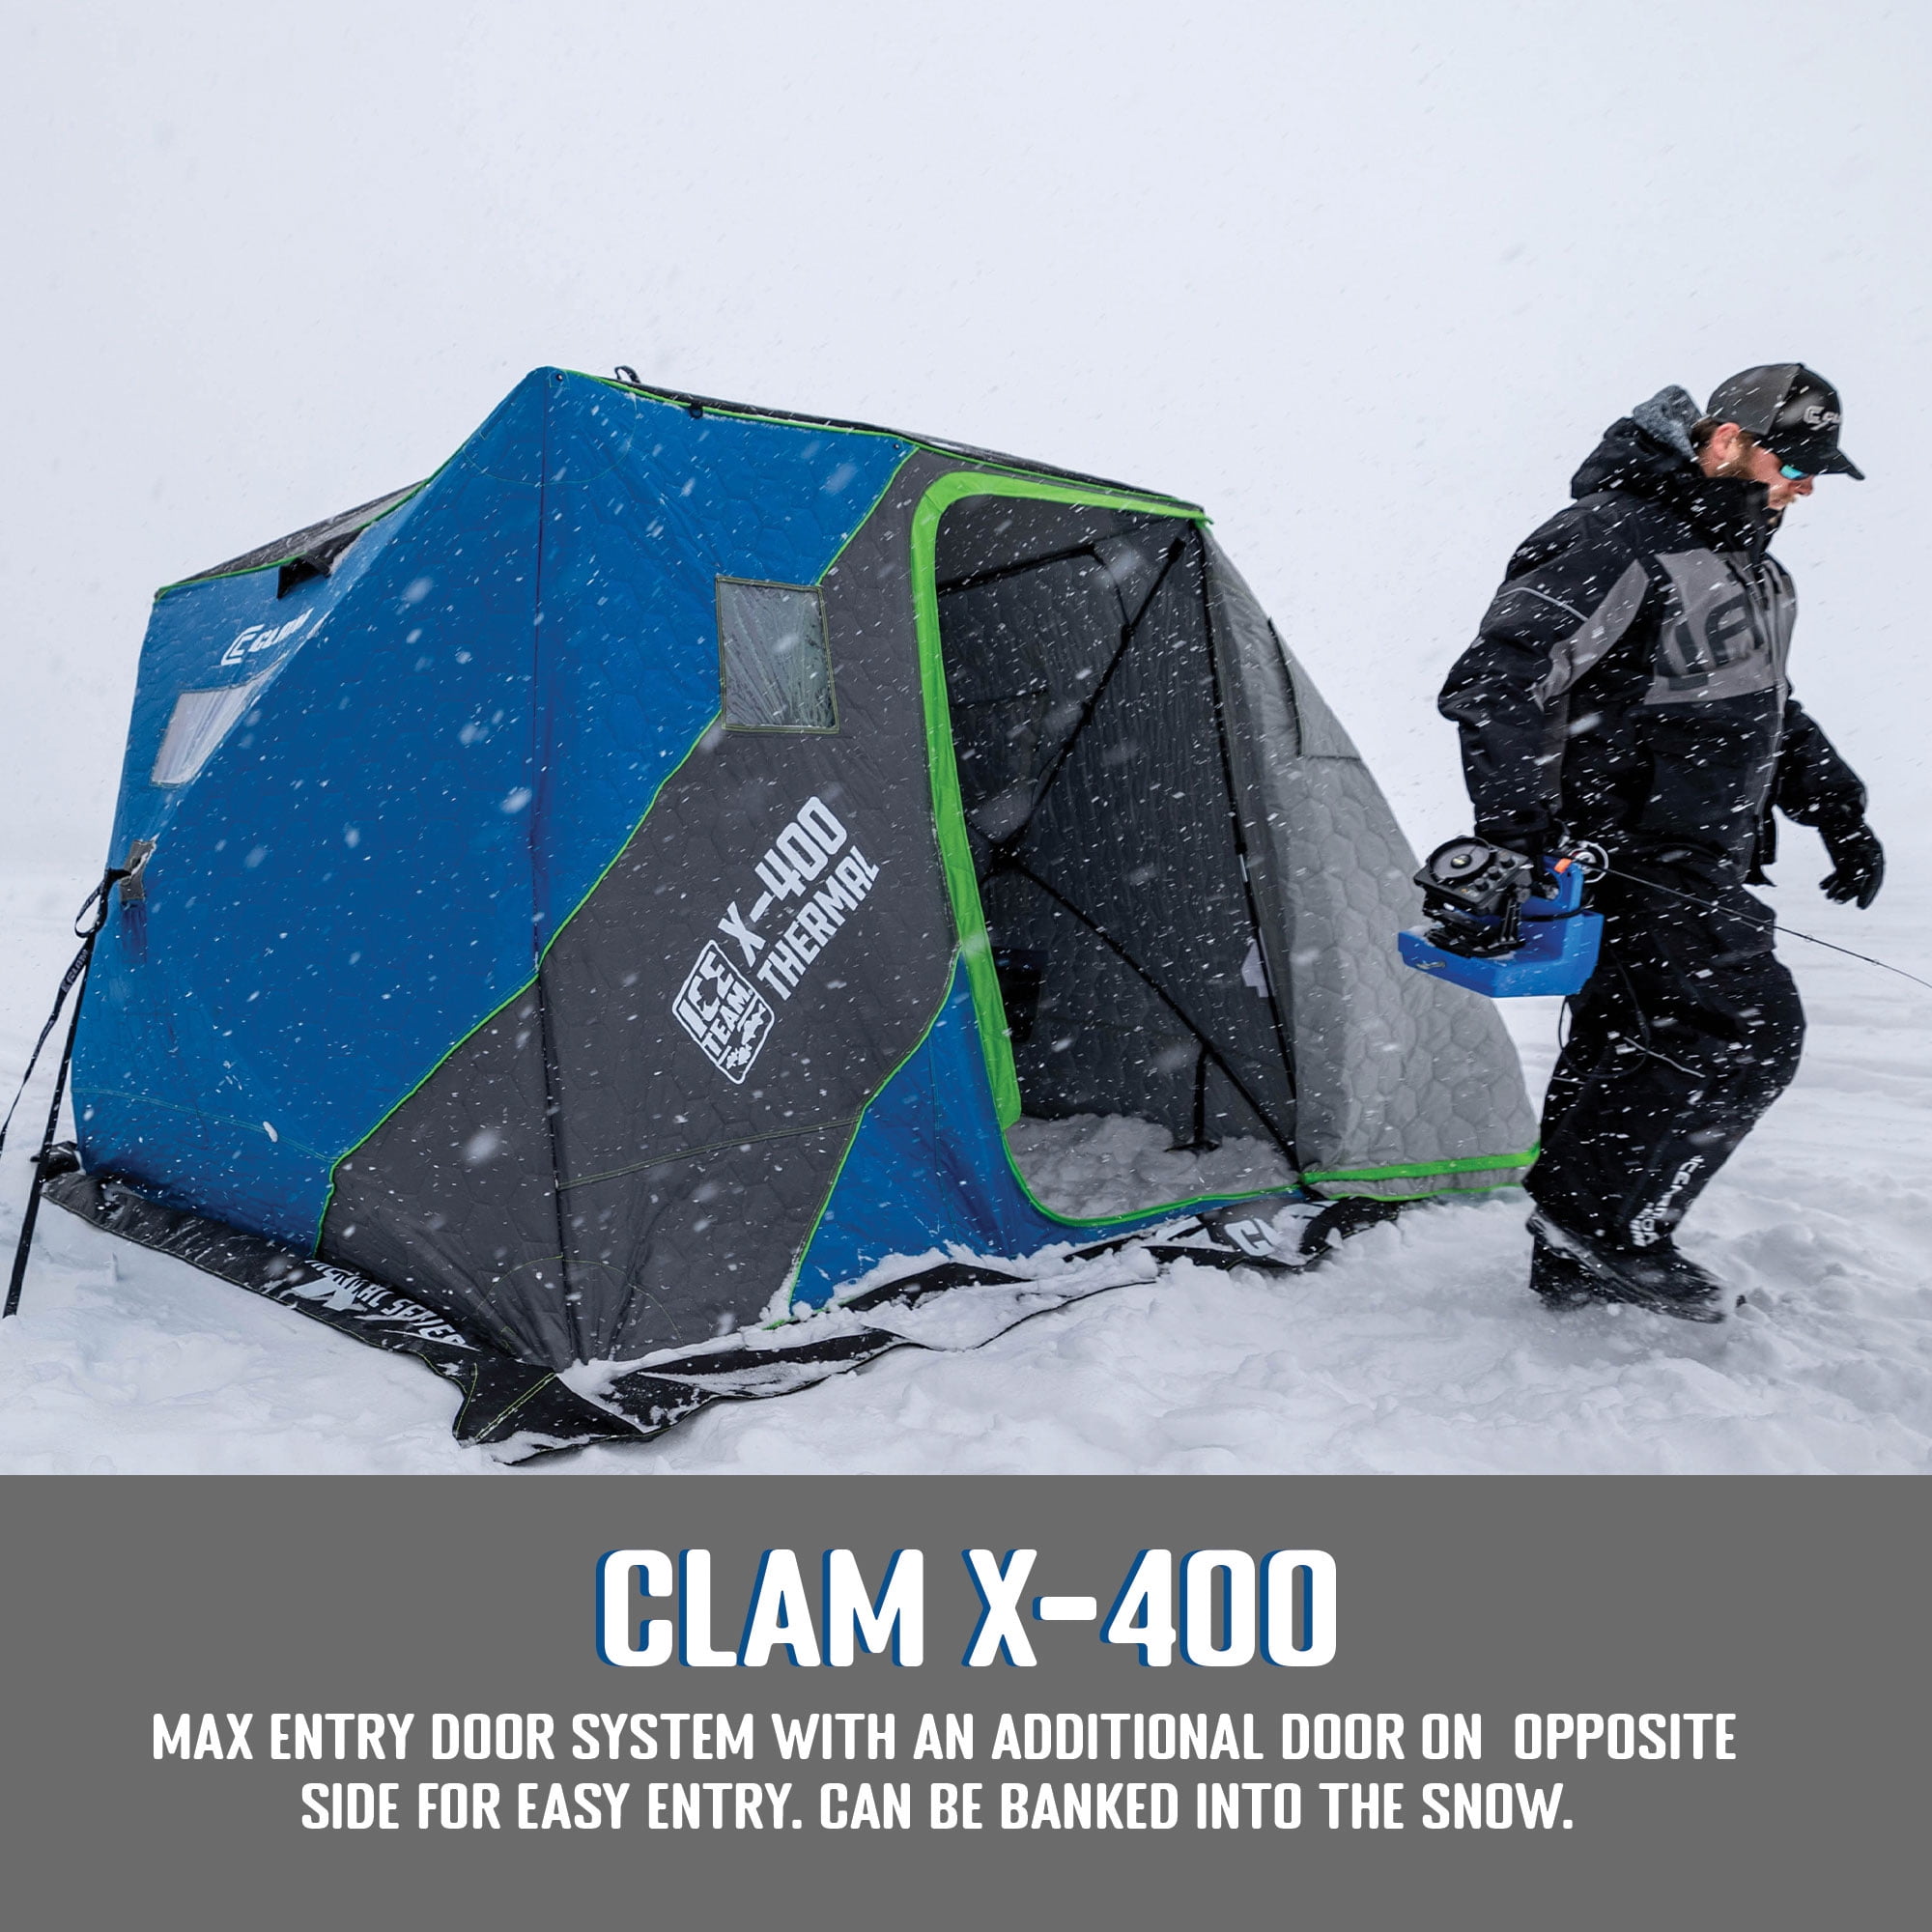 CLAM X-600 Portable 7 Person 11.5' Pop Up Ice Fishing Thermal